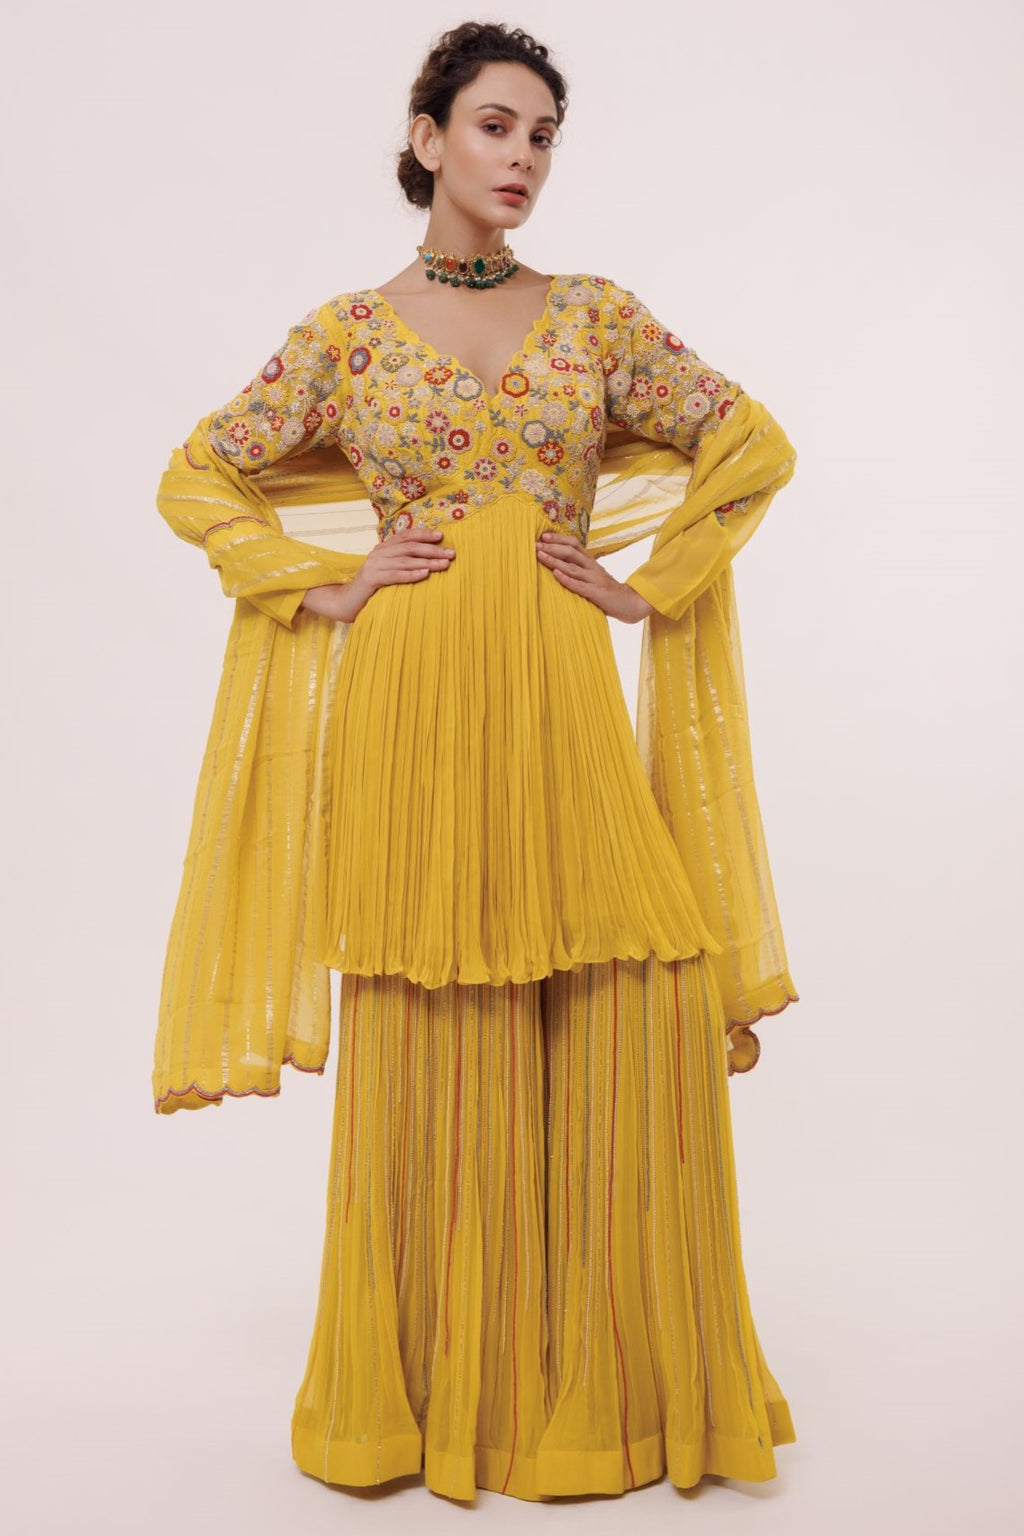 Buy this Look your best on festive occasions in this beautiful yellow georgette suit with a floral peplum top and pleated sharara with multicolor pearl. It comes with a matching organza dupatta. Dazzle on weddings and special occasions with exquisite Indian designer dresses, sharara suits, Anarkali suits, and wedding lehengas from Pure Elegance Indian fashion store in the USA.